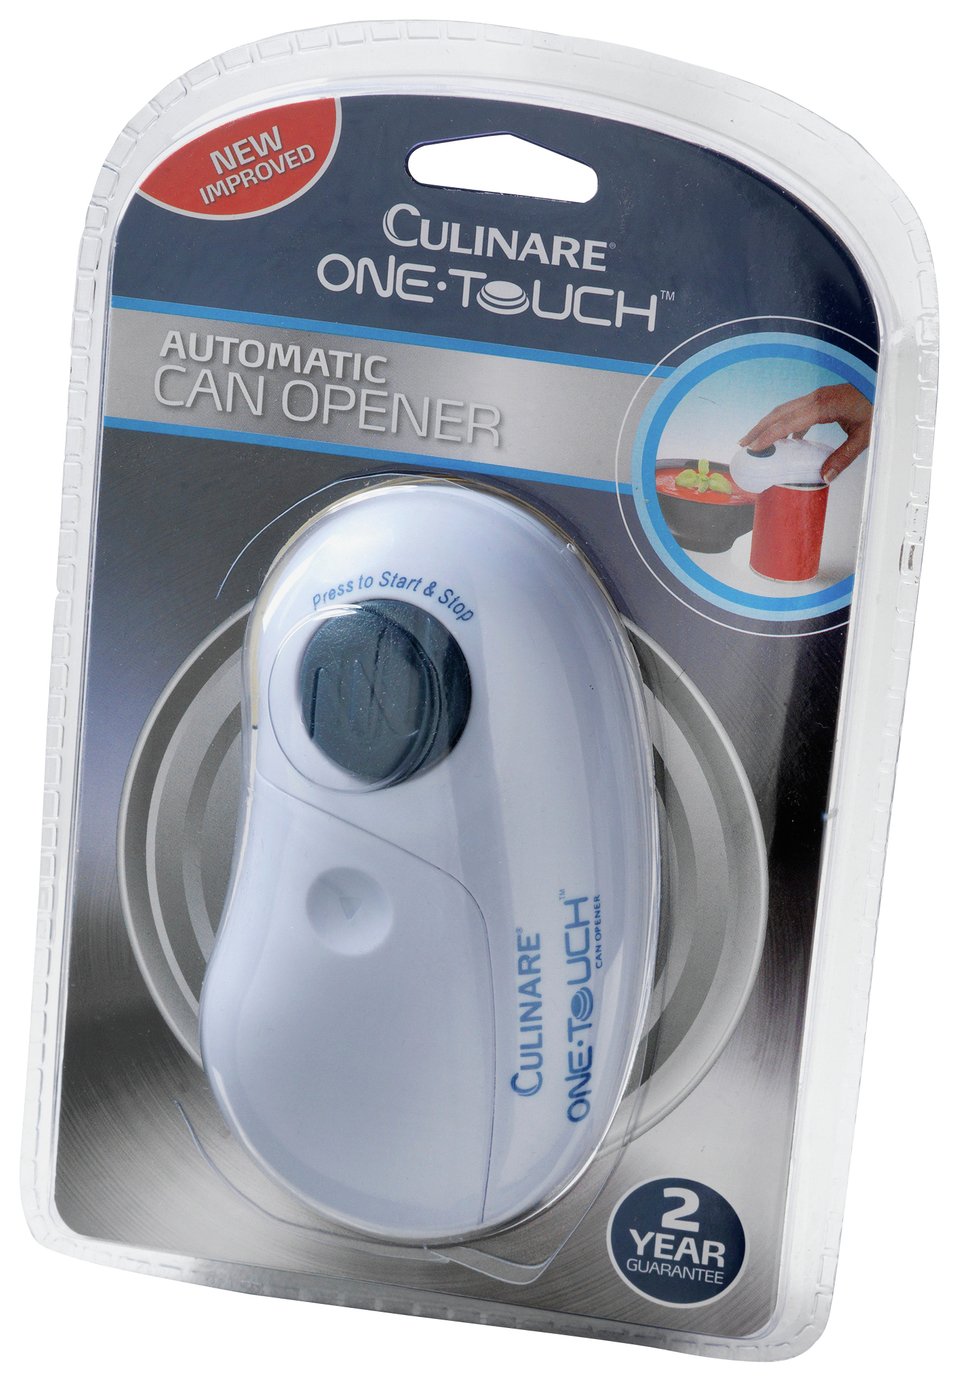 Culinare One Touch Can Opener review